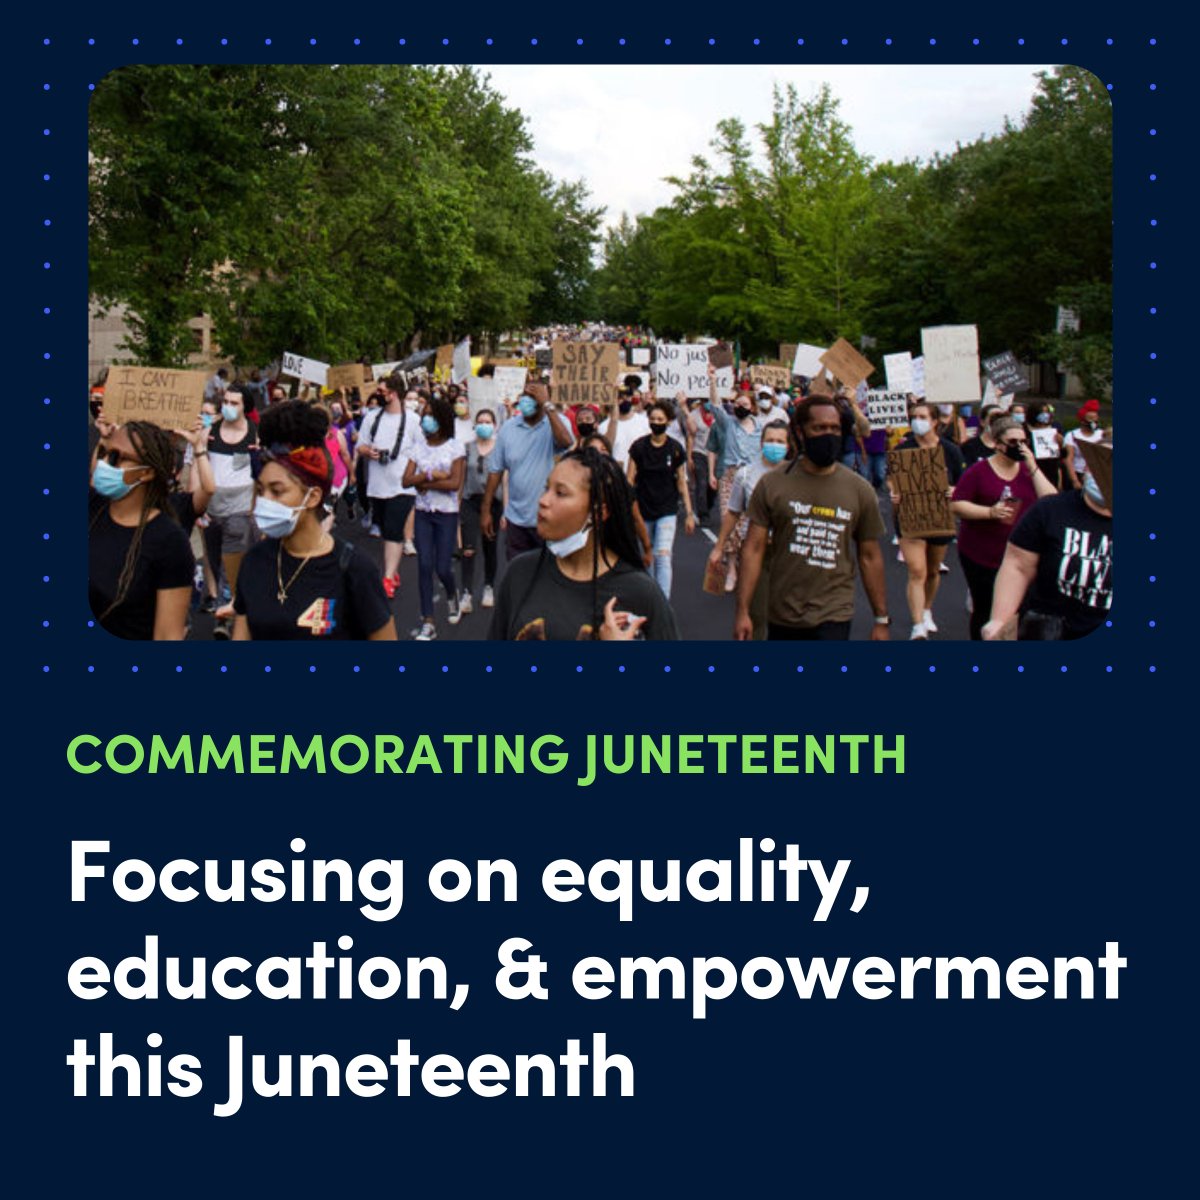 #Juneteenth is a time to educate yourself on the importance of acknowledging the historical and ongoing systemic injustices Black communities face. Read today's inspirational thought leadership piece in collaboration with @GivingGap here: bit.ly/43JPlyc.